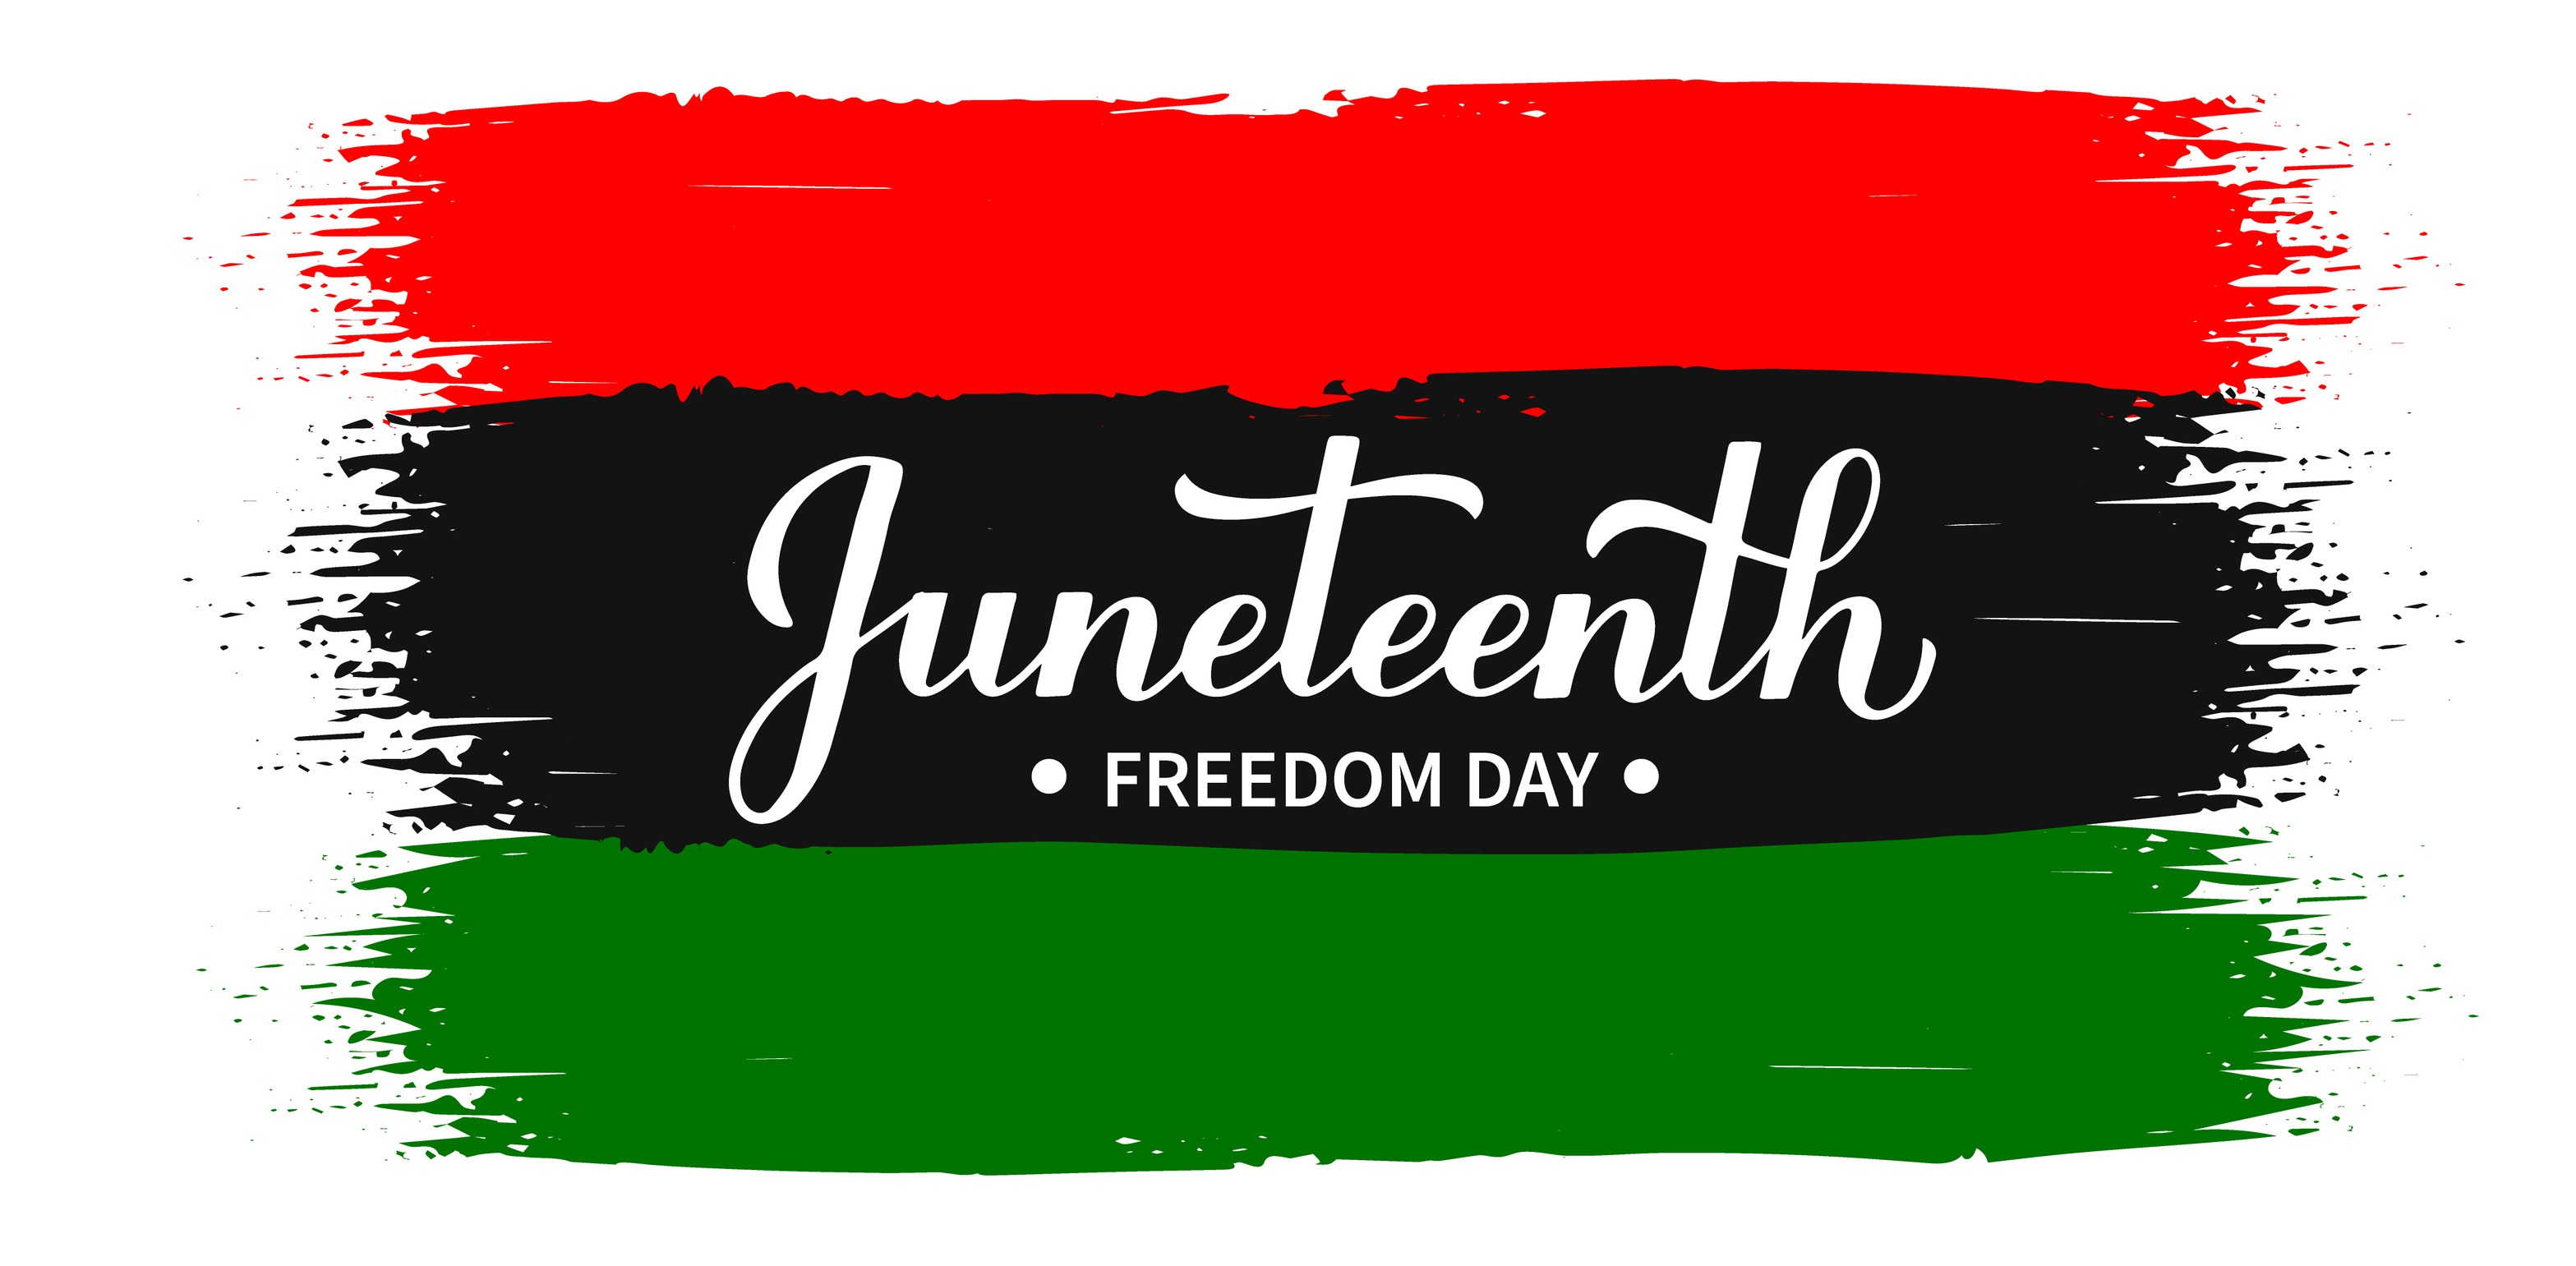 red, black and green flag with juneteenth text over it